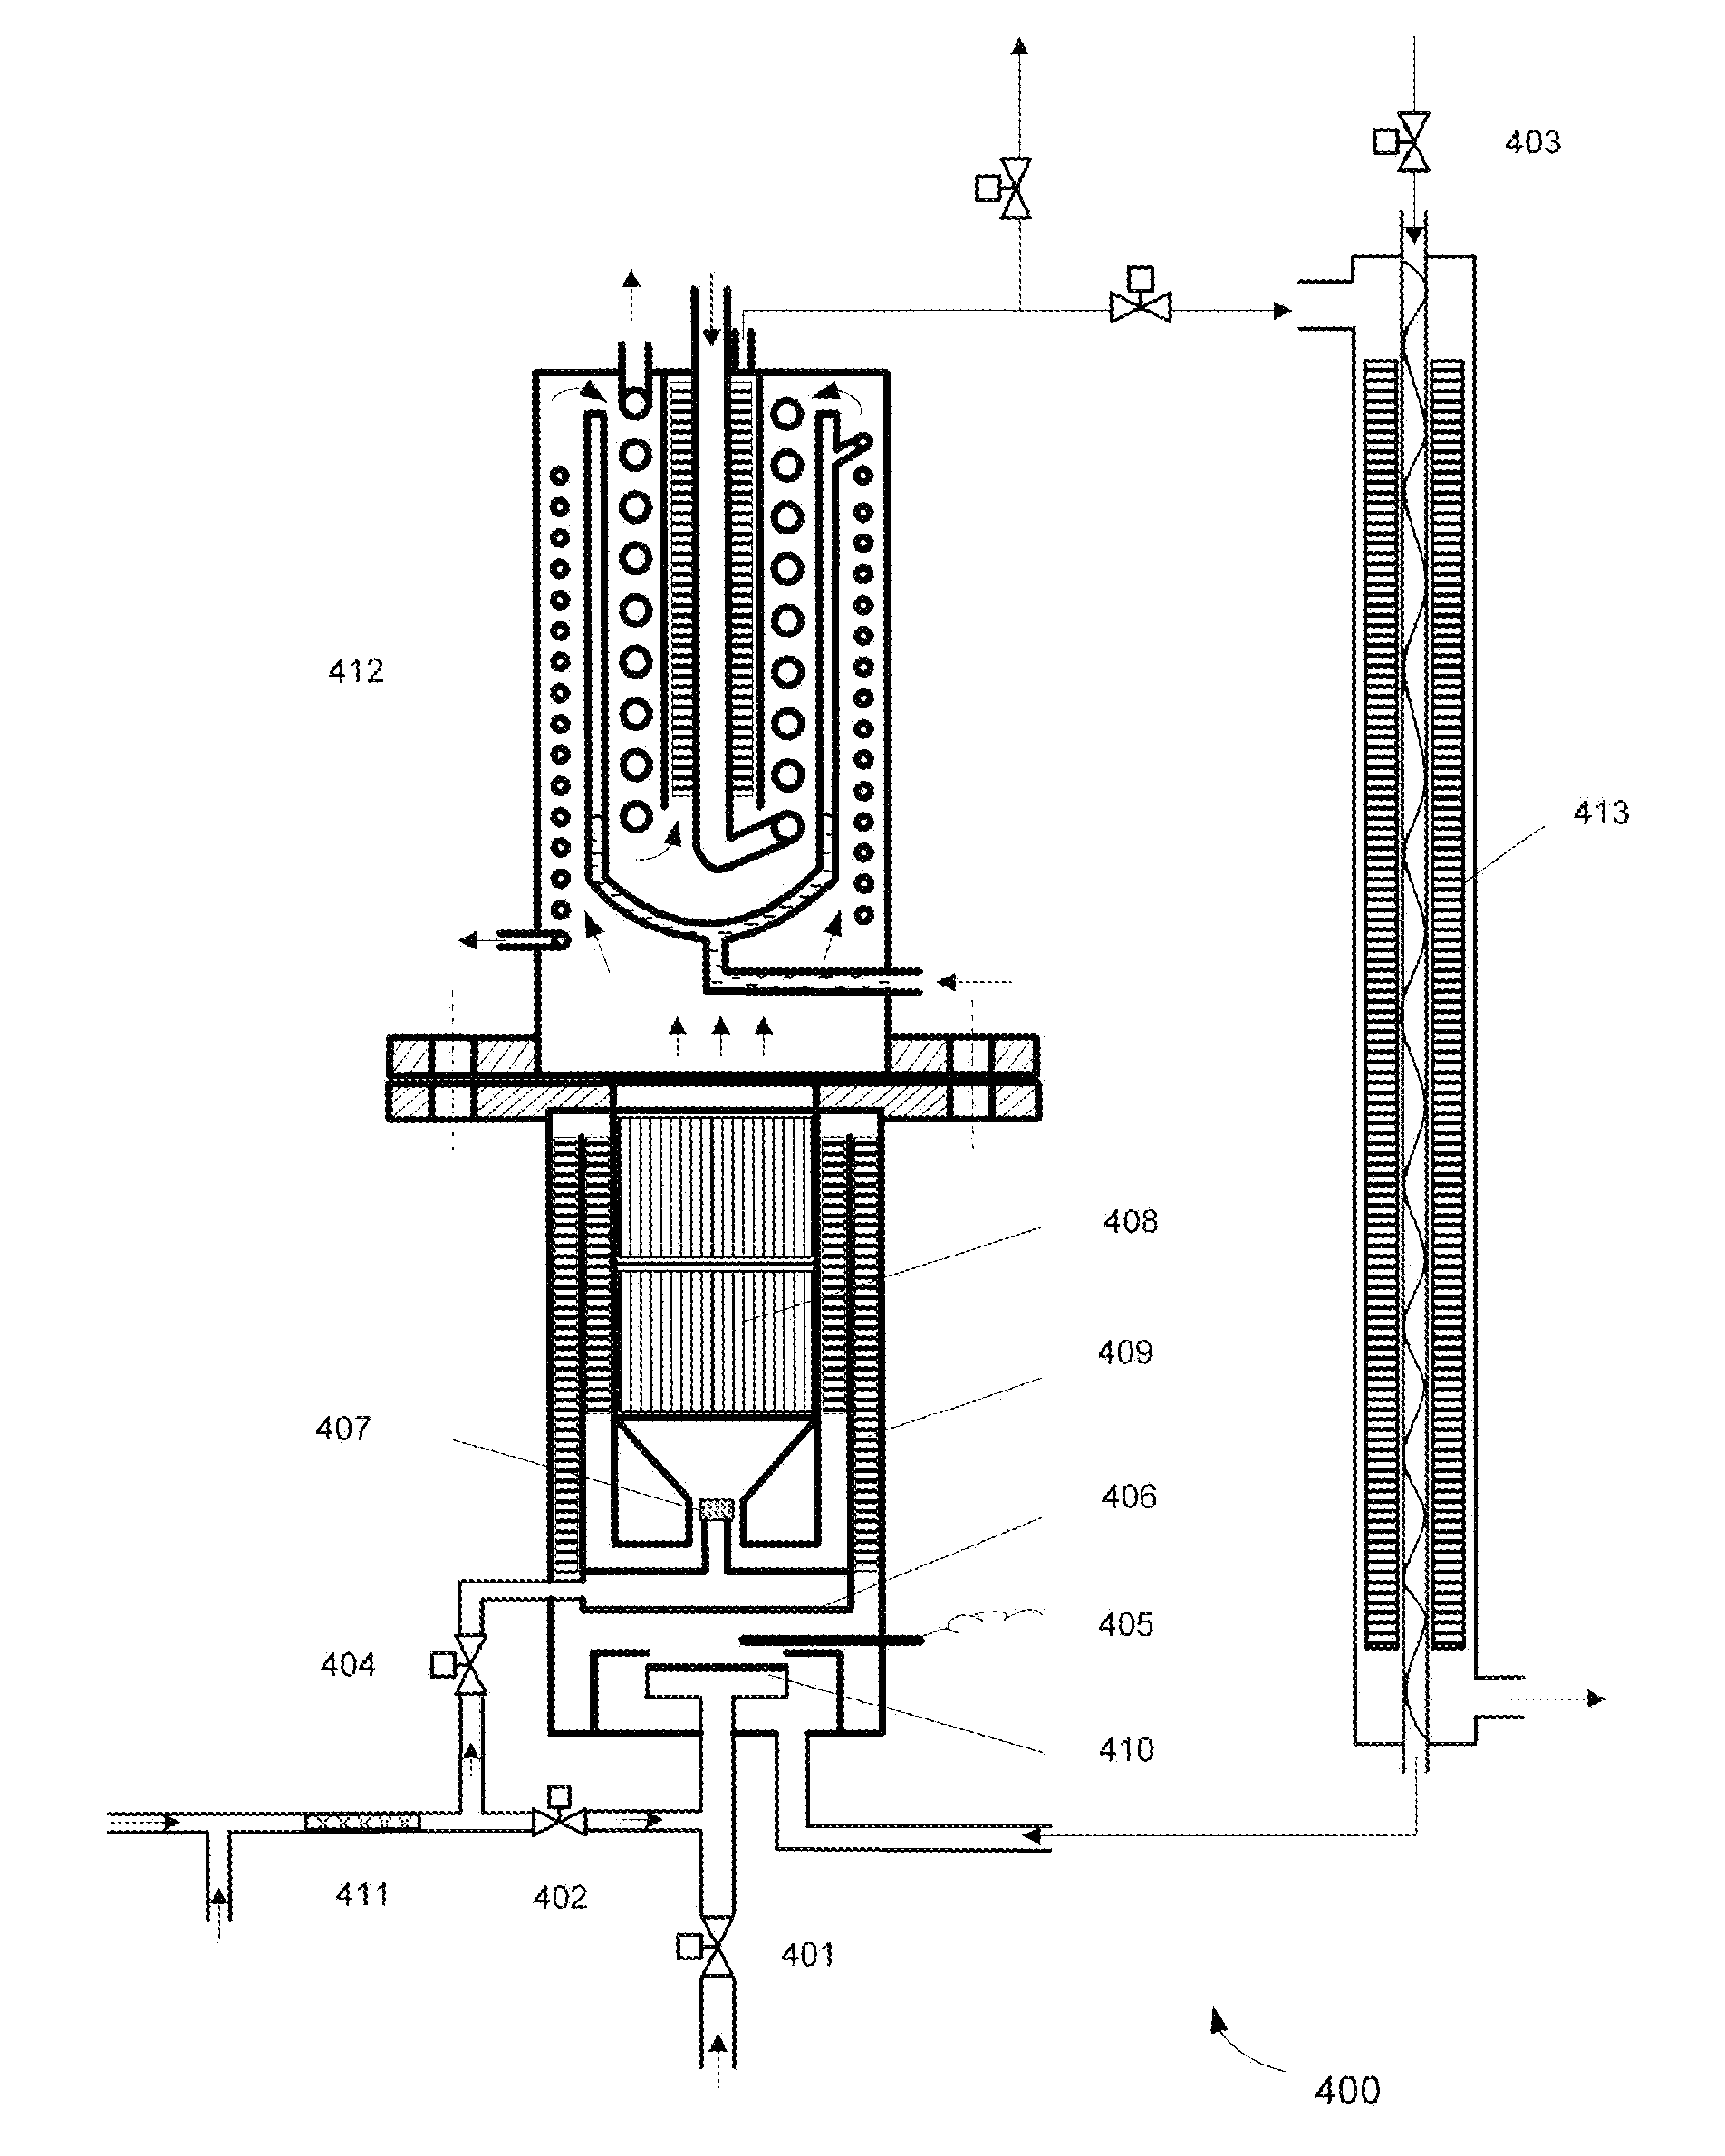 Hybrid Combustor for Fuel Processing Applications